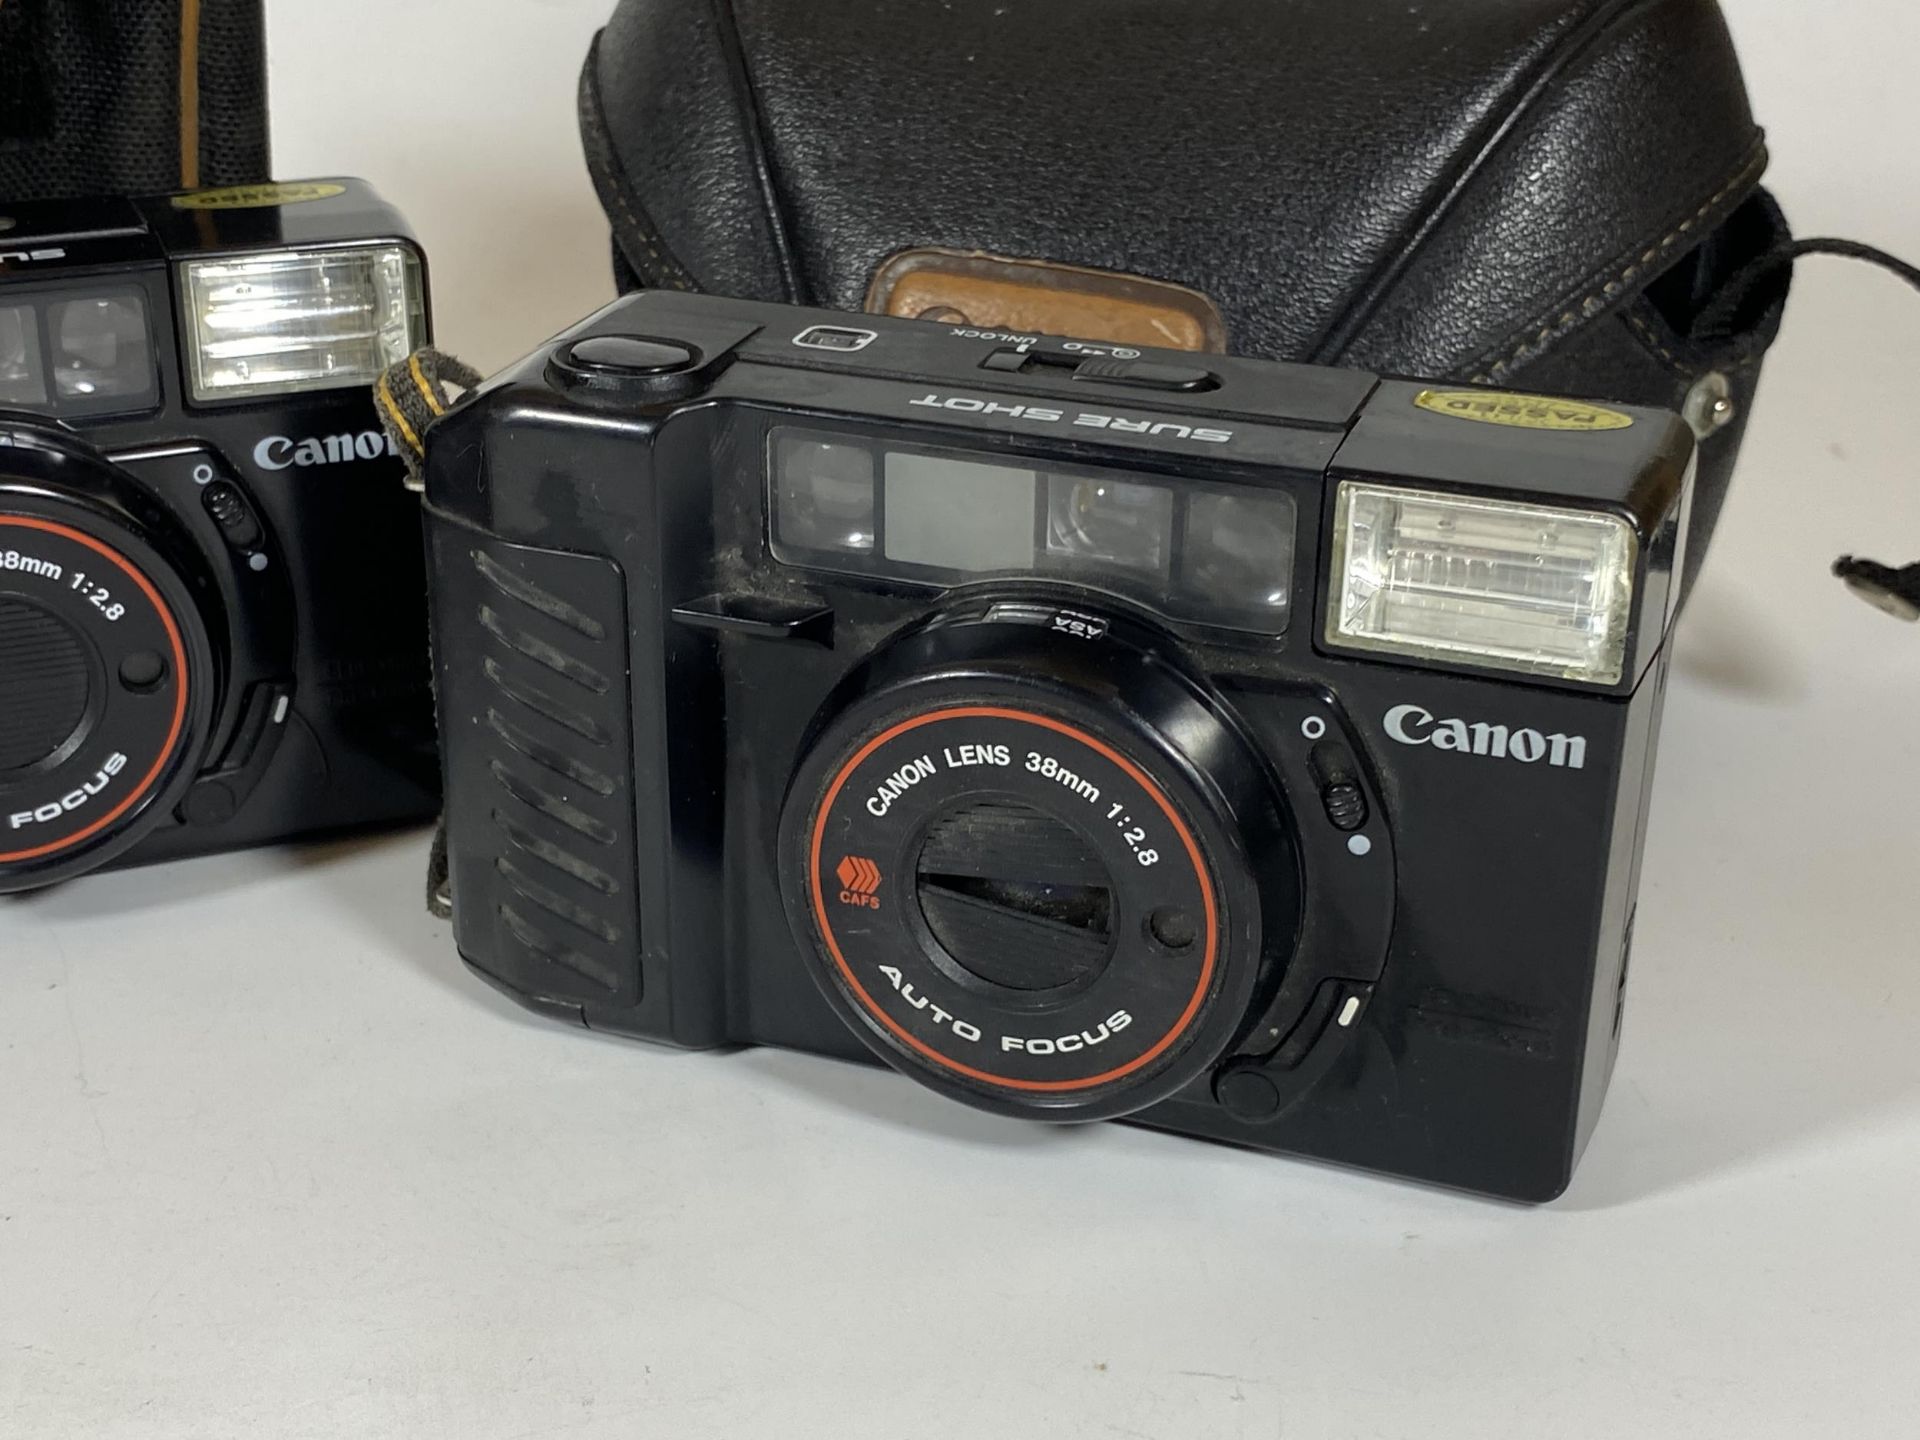 TWO CASED CANON SURE SHOT 38MM CAMERAS - Image 3 of 3